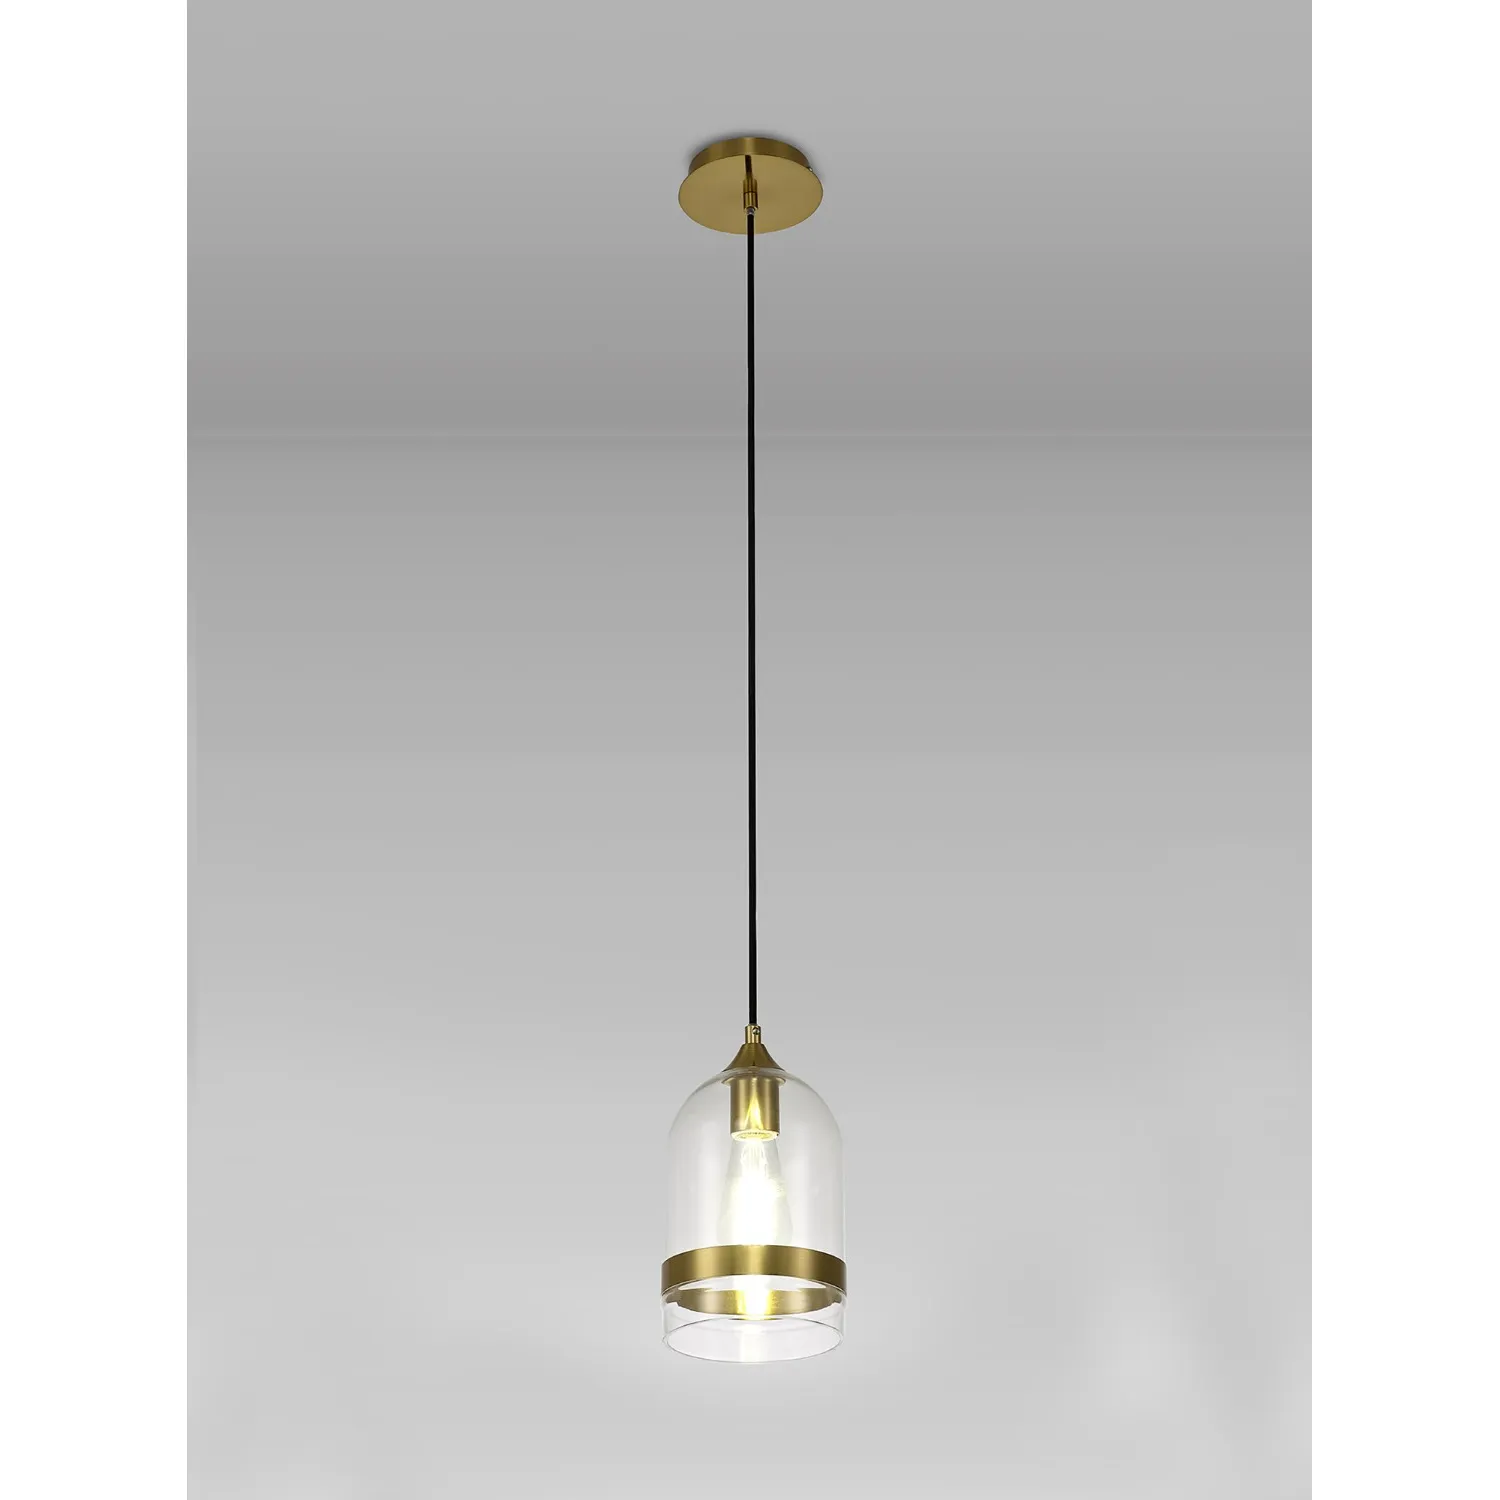 Salisbury Pendant 15cm Dome, 1 x E27 (Max 20W), Aged Brass And Clear